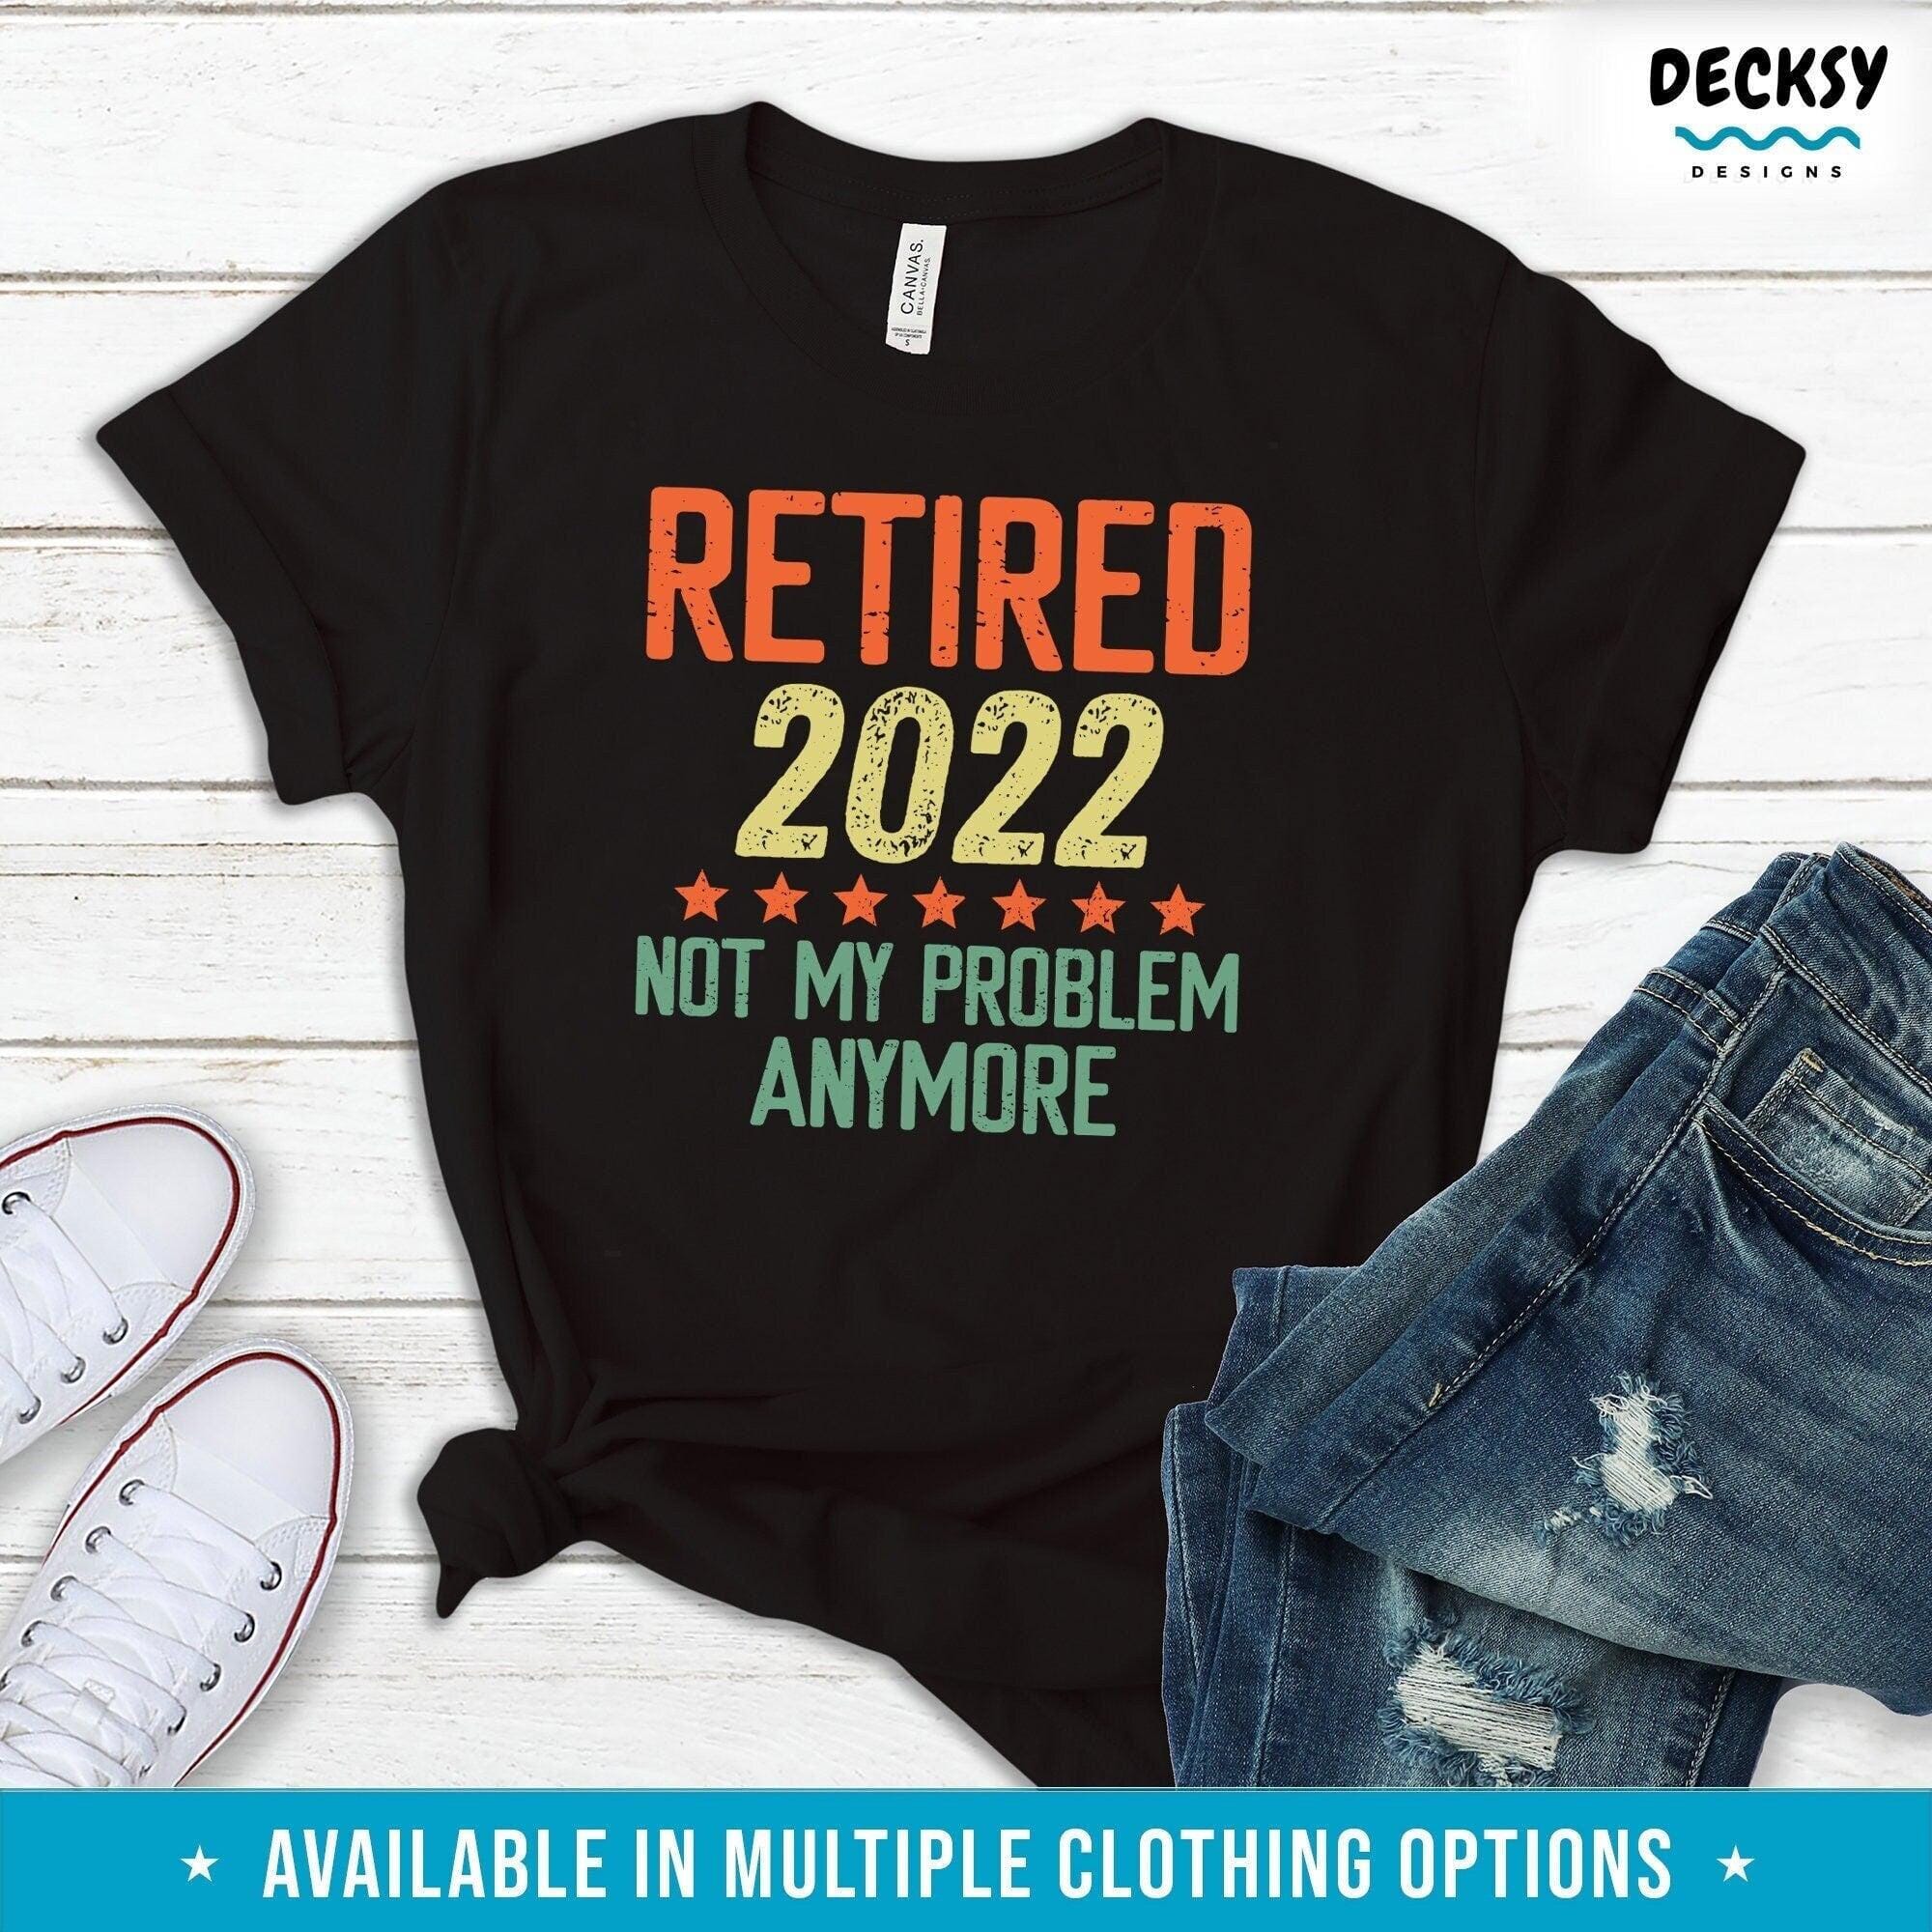 Retired 2022 Shirt, Funny Retirement Gift-Clothing:Gender-Neutral Adult Clothing:Tops & Tees:T-shirts:Graphic Tees-DecksyDesigns